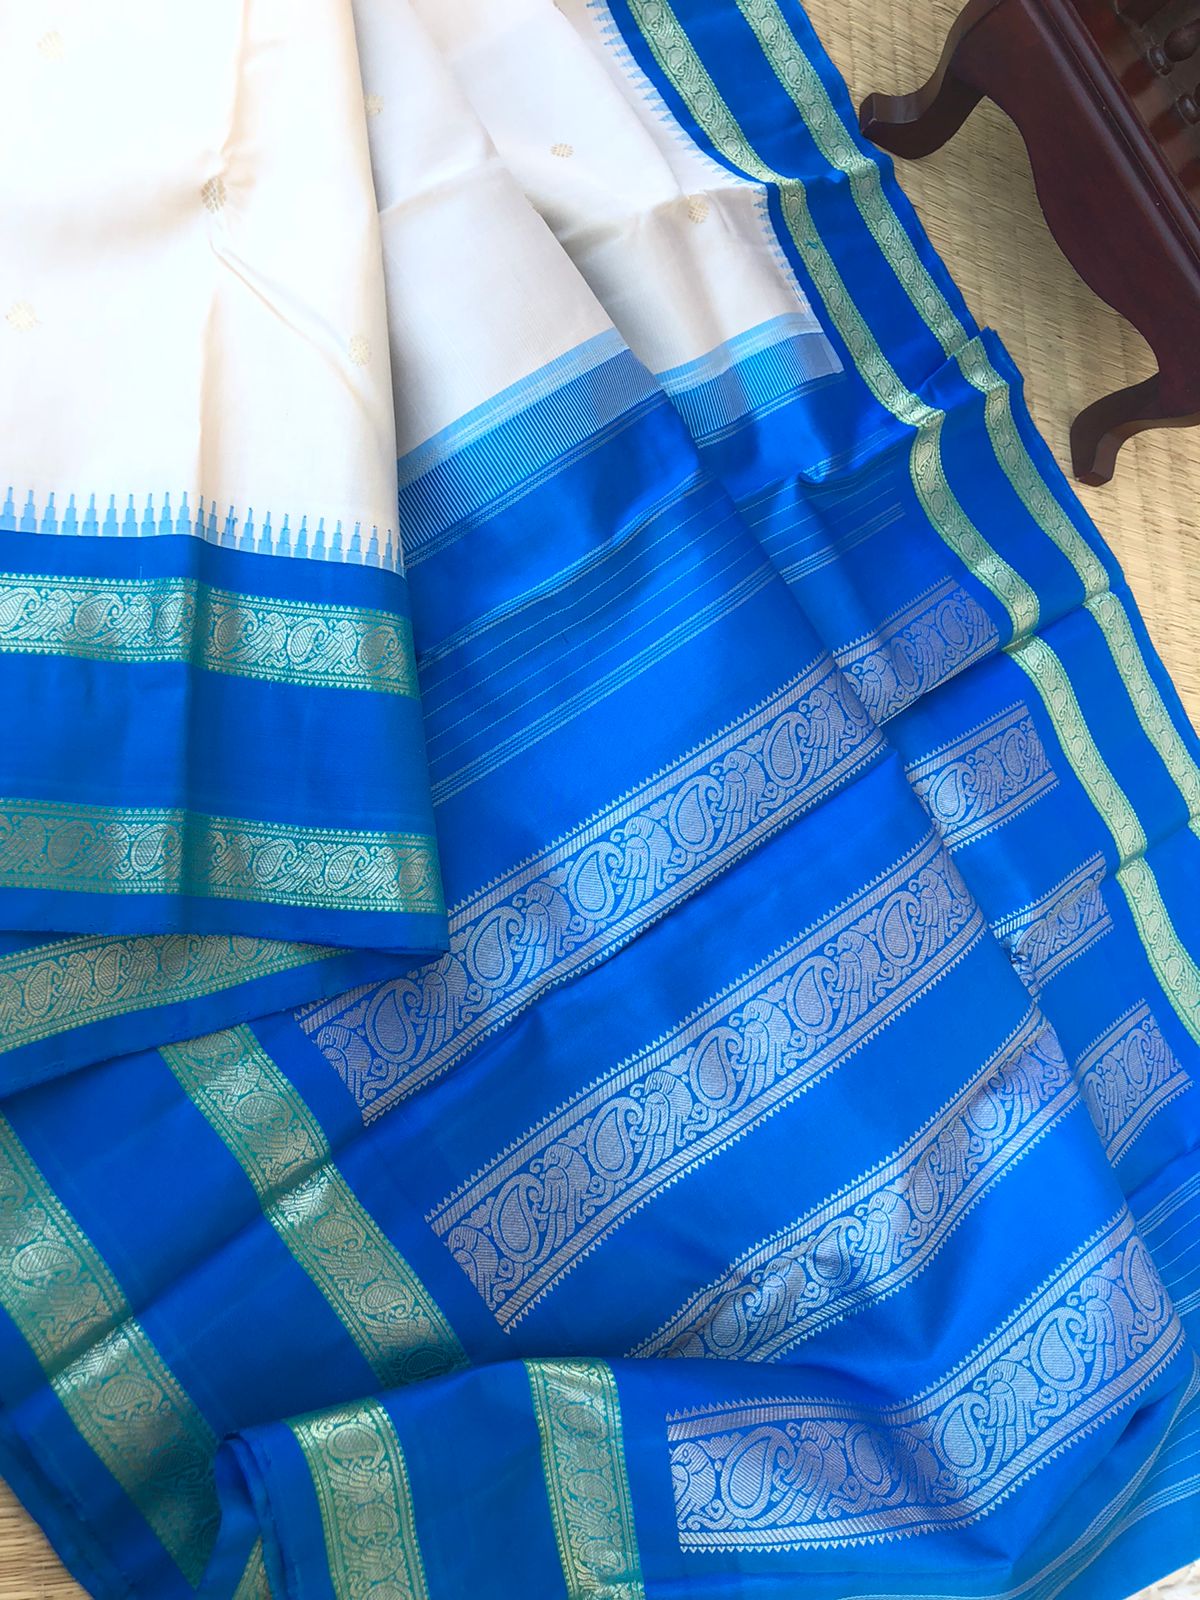 Kanchivarams Connected by Korvai - unusual pale calcium off white and blue korvai Kanchivaram with rett pett woven borders